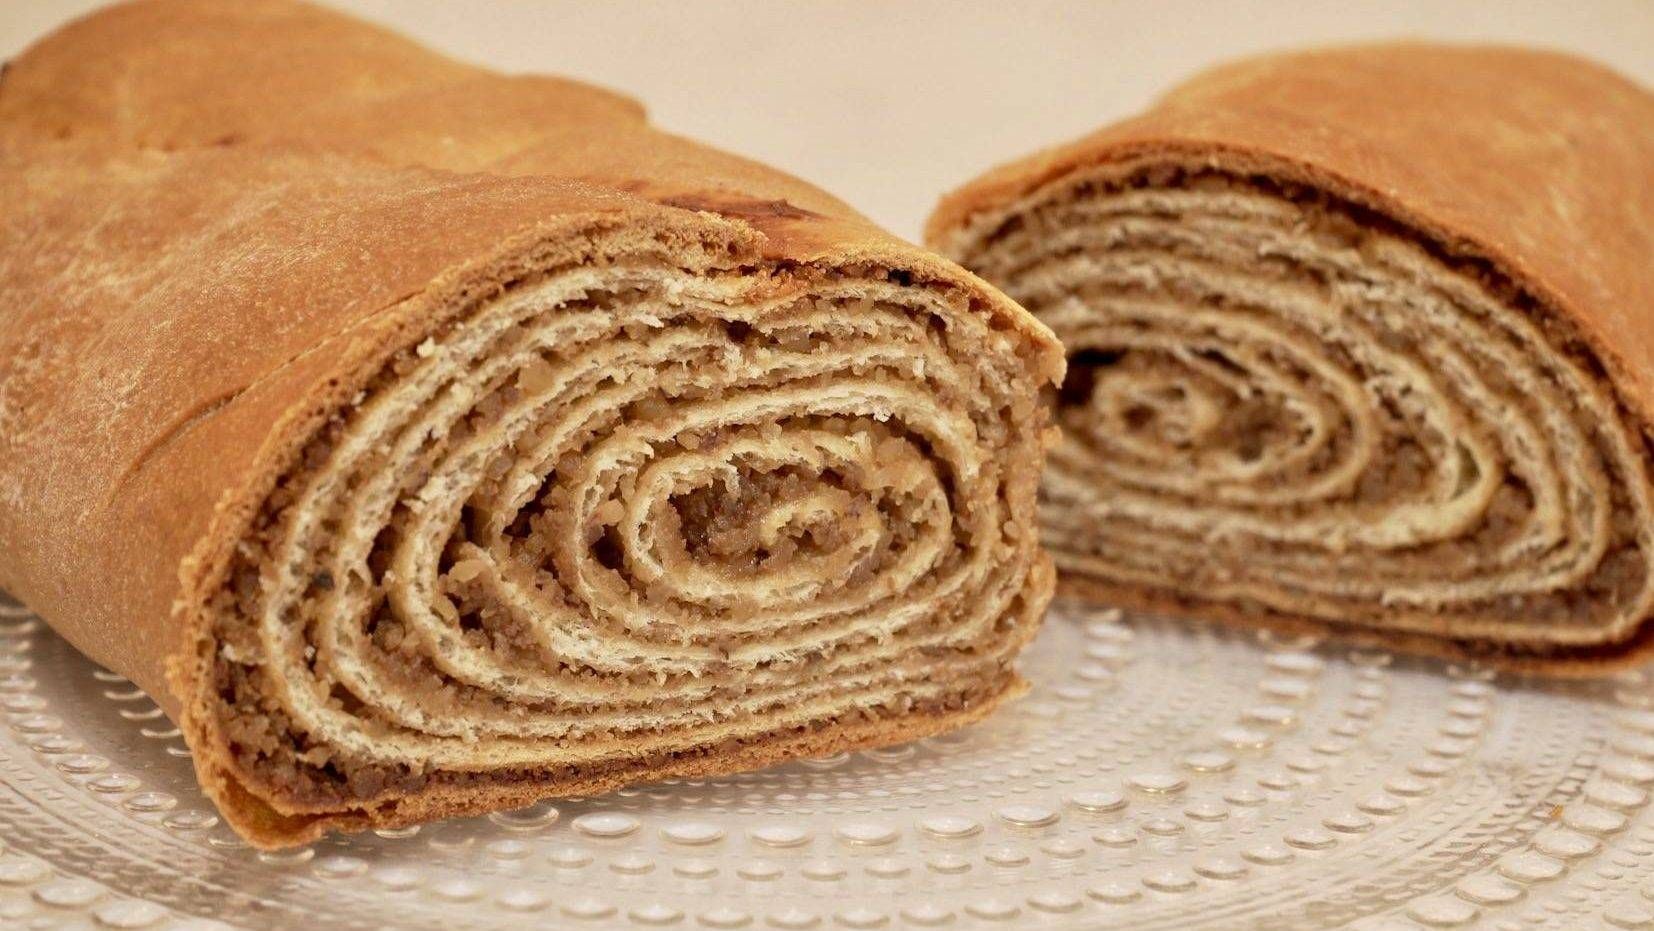 A loaf of potica cut in half on a glass platter revealing the swirled layers of walnut filling.